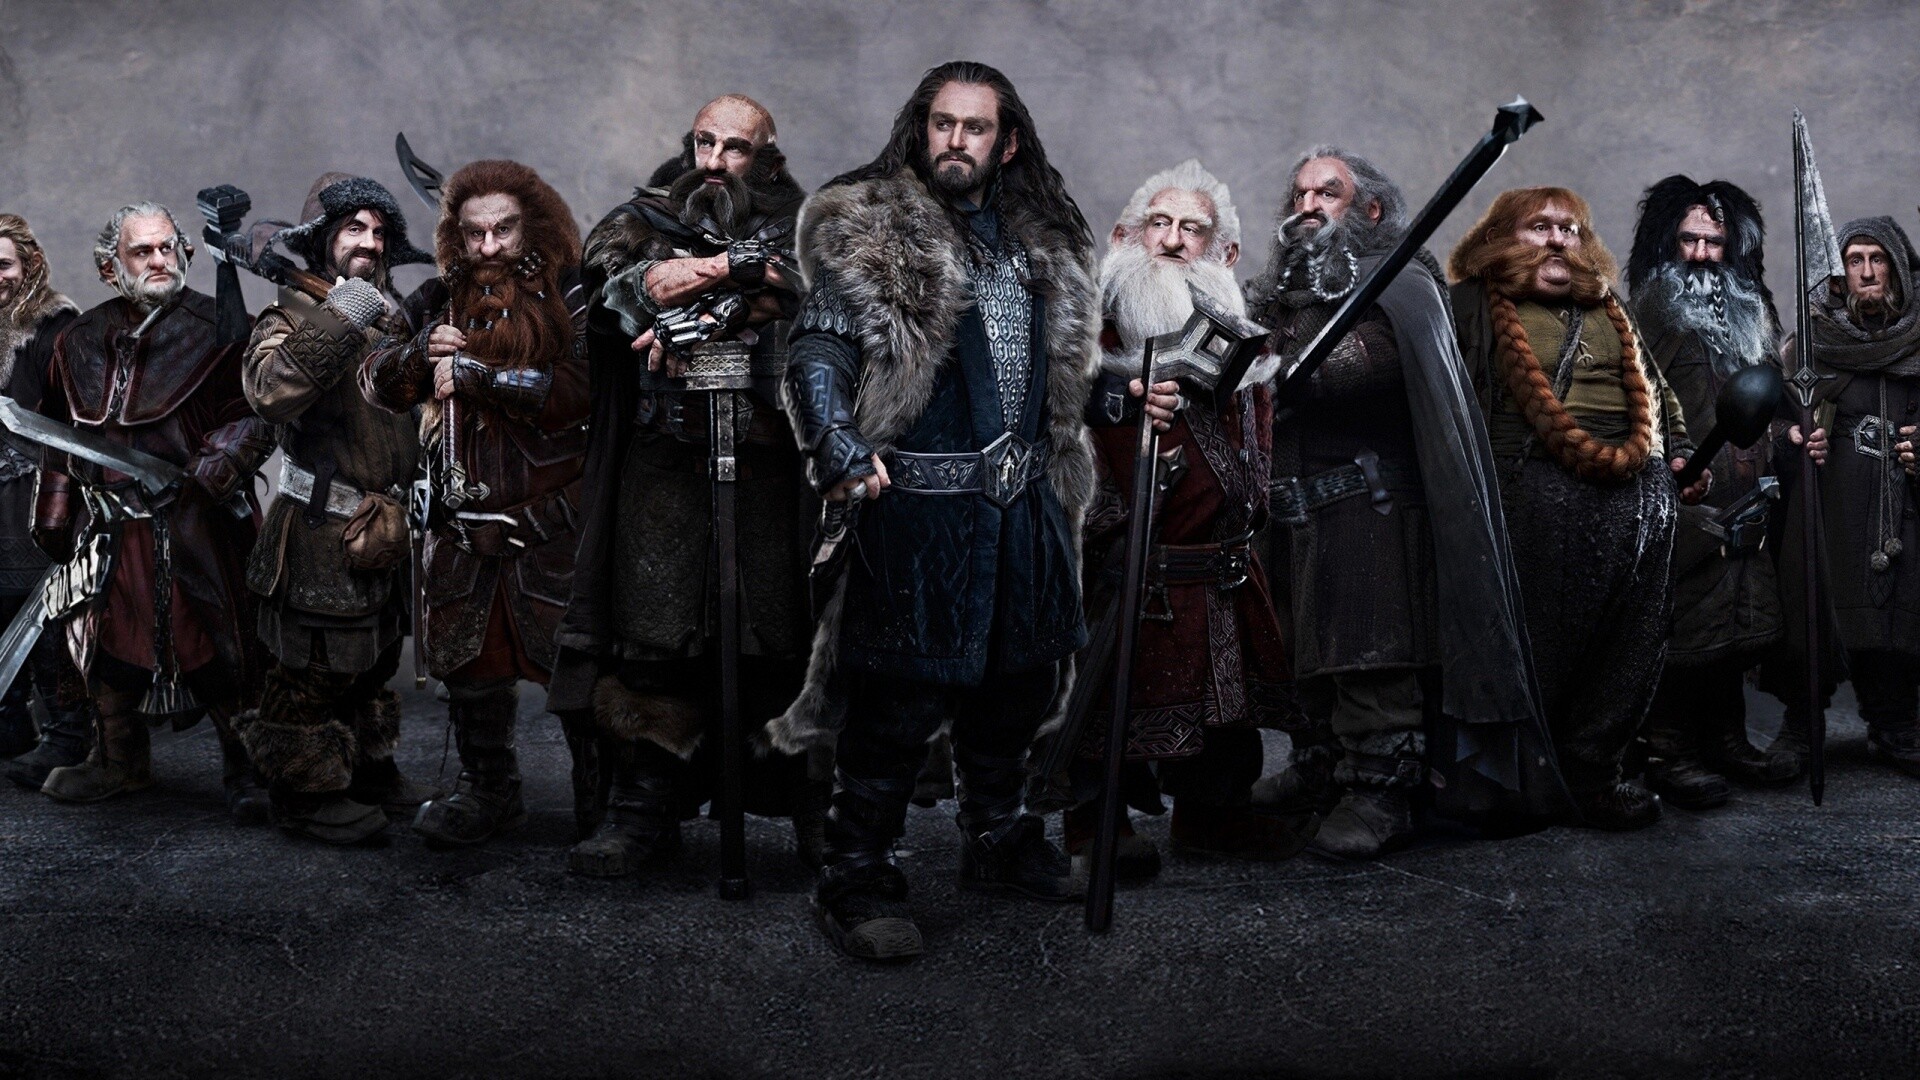 The Hobbit: Thorin Oakenshield, The leader of the Company of Dwarves. 1920x1080 Full HD Wallpaper.